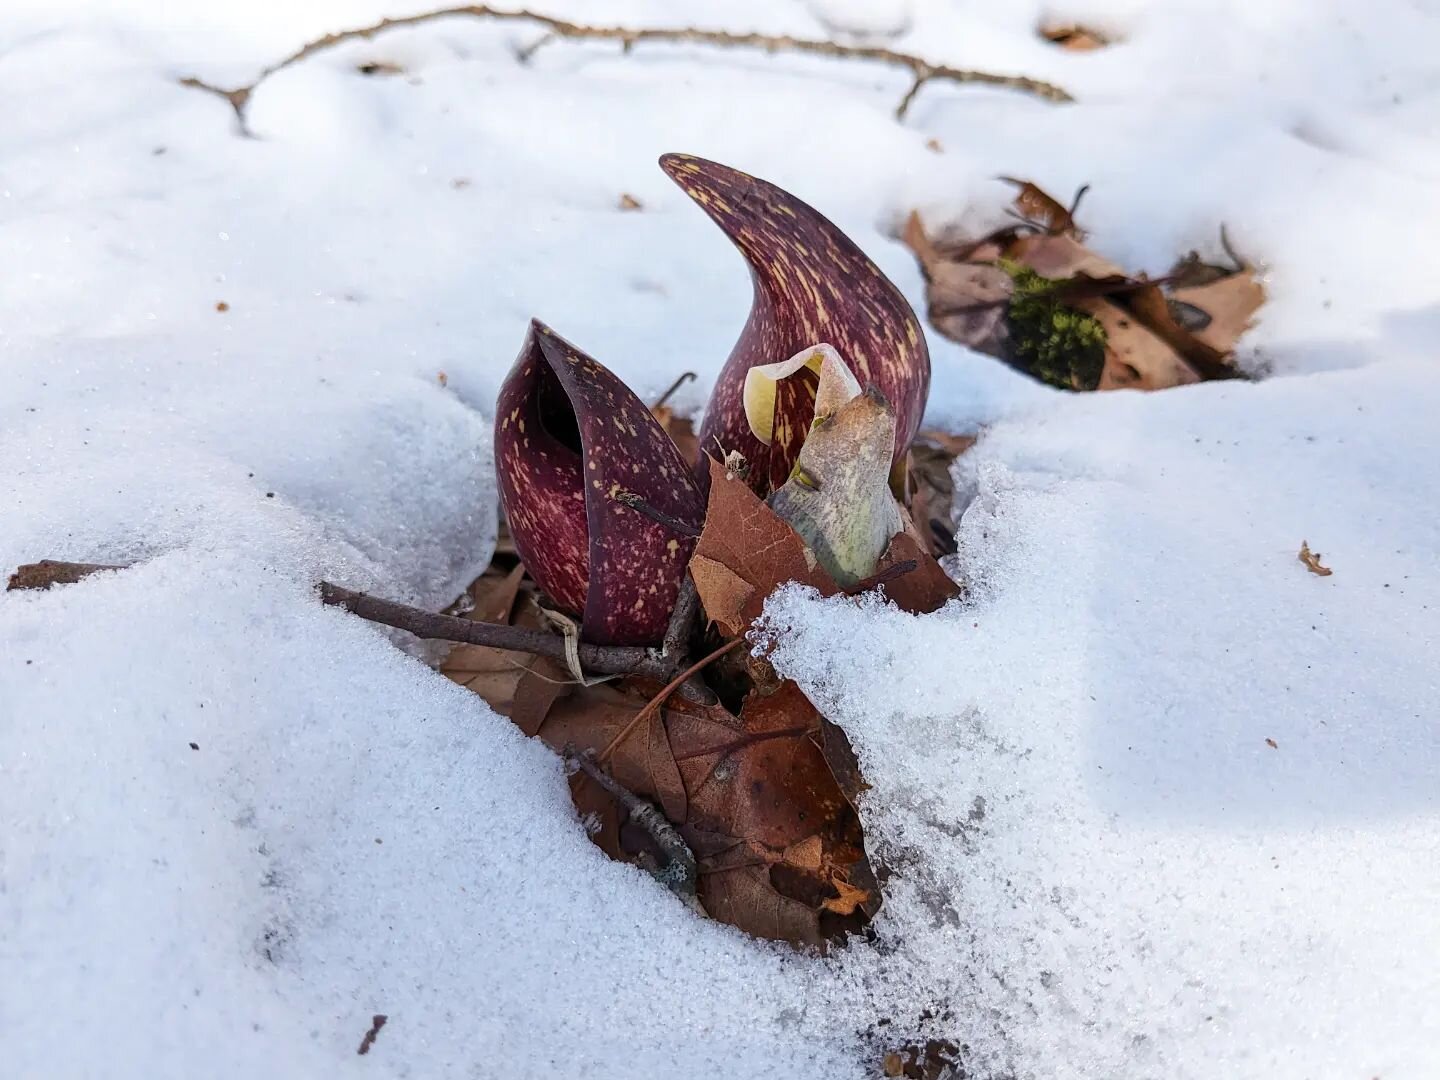 Skunk Cabbage haiku: embracing the stink / I make my own warm fireside / for any who visit